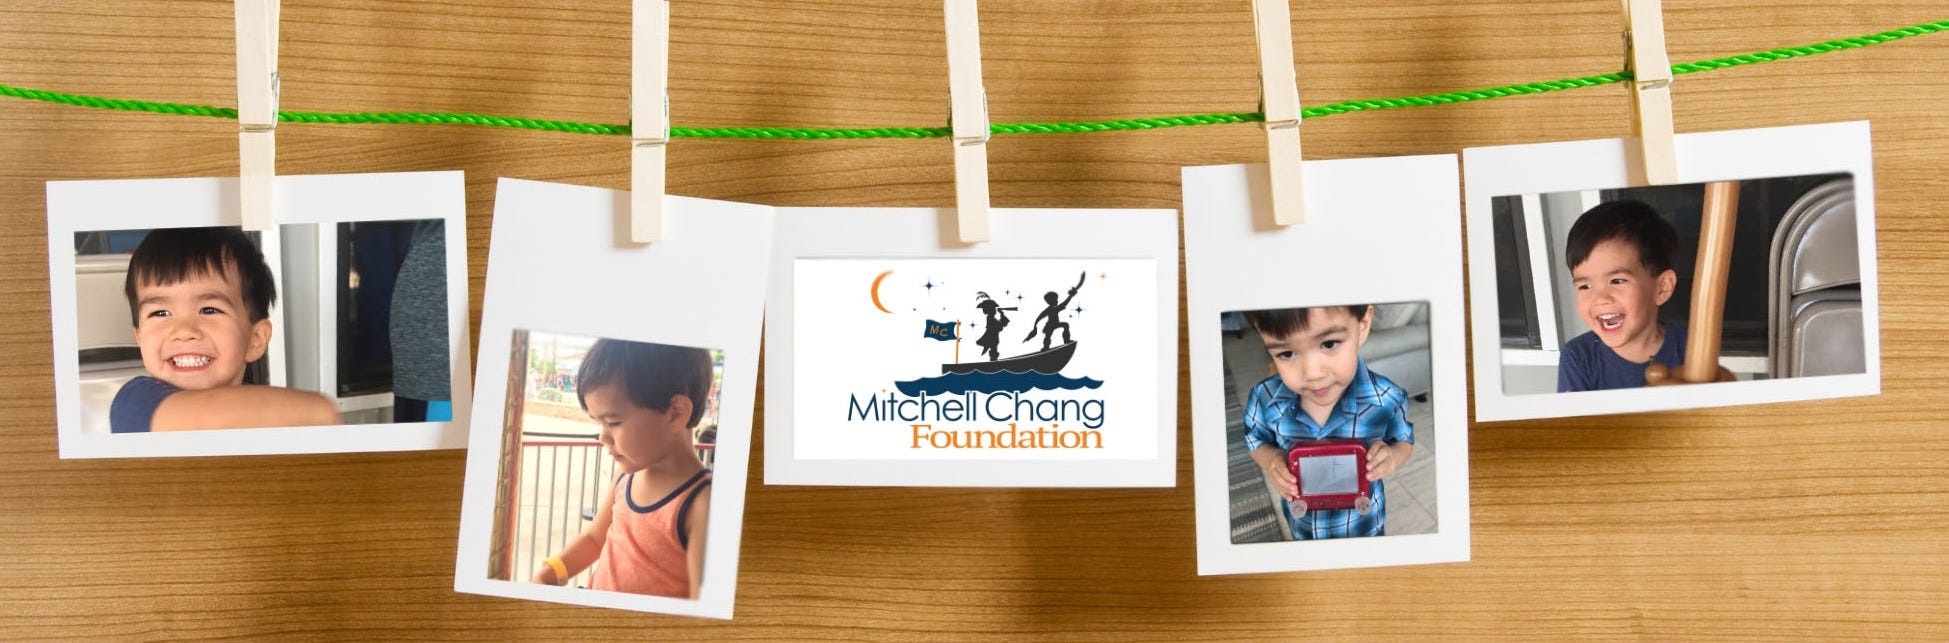 Mitchell Chang Foundation Plans First Inclusive Playground in San Antonio